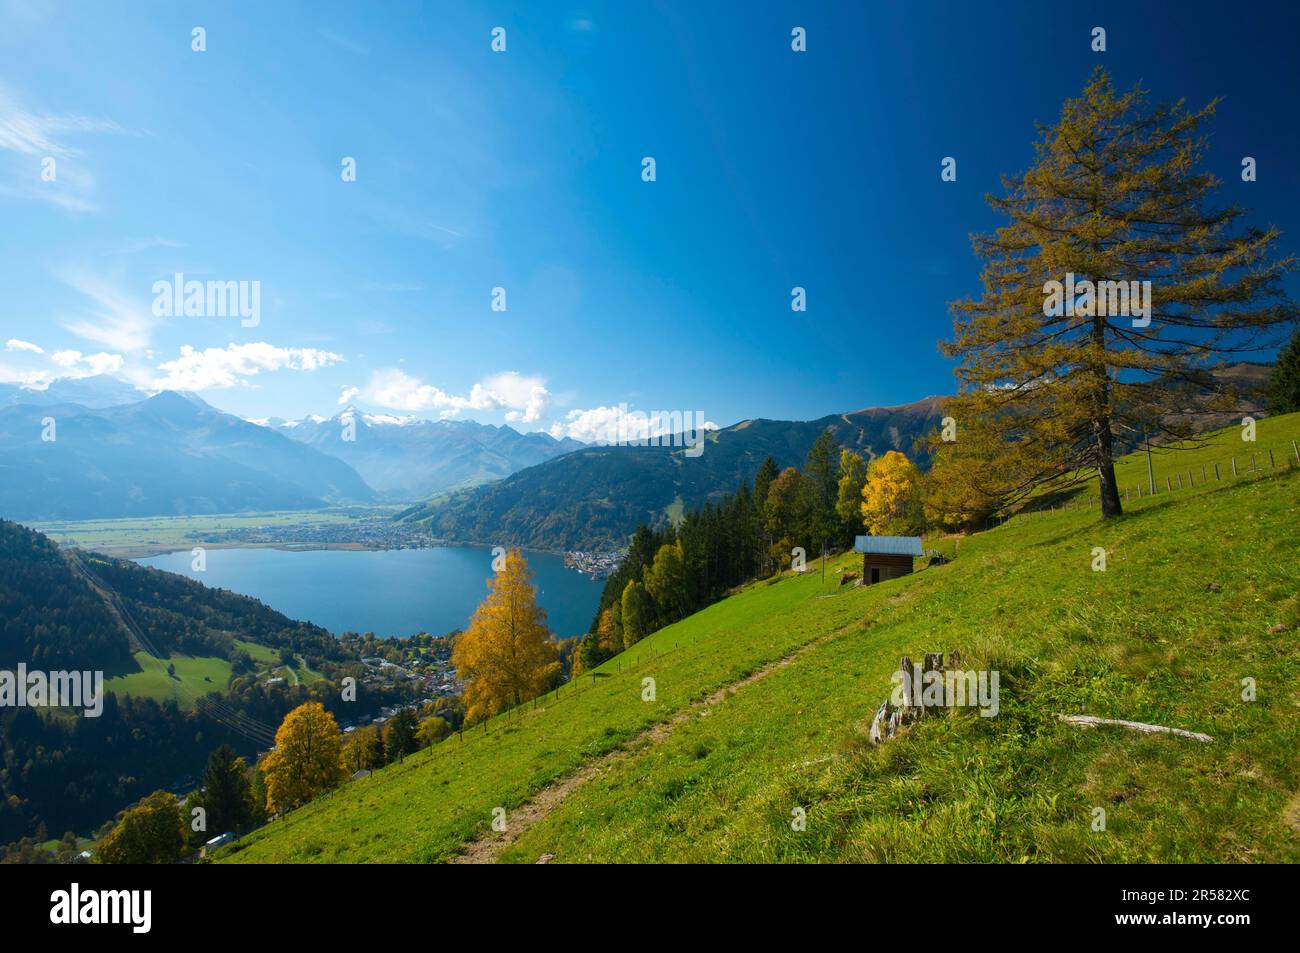 Lake Zell with a view of Thumersbach, Schuettdorf and Hohe Tauern, Pinzgau in Salzburger Land, Austria Stock Photo